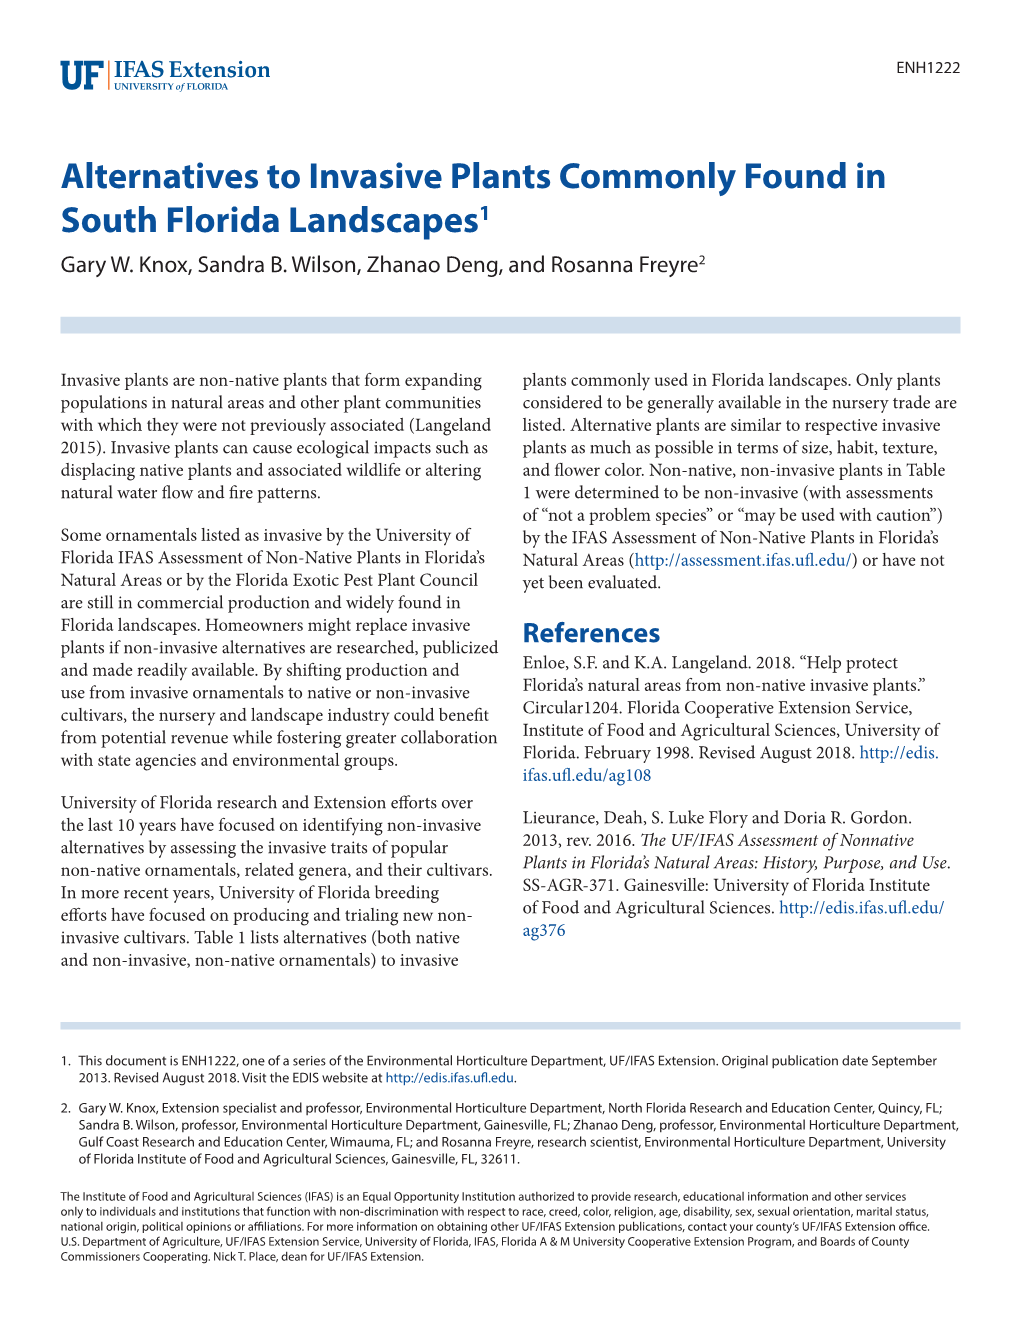 Alternatives to Invasive Plants Commonly Found in South Florida Landscapes1 Gary W